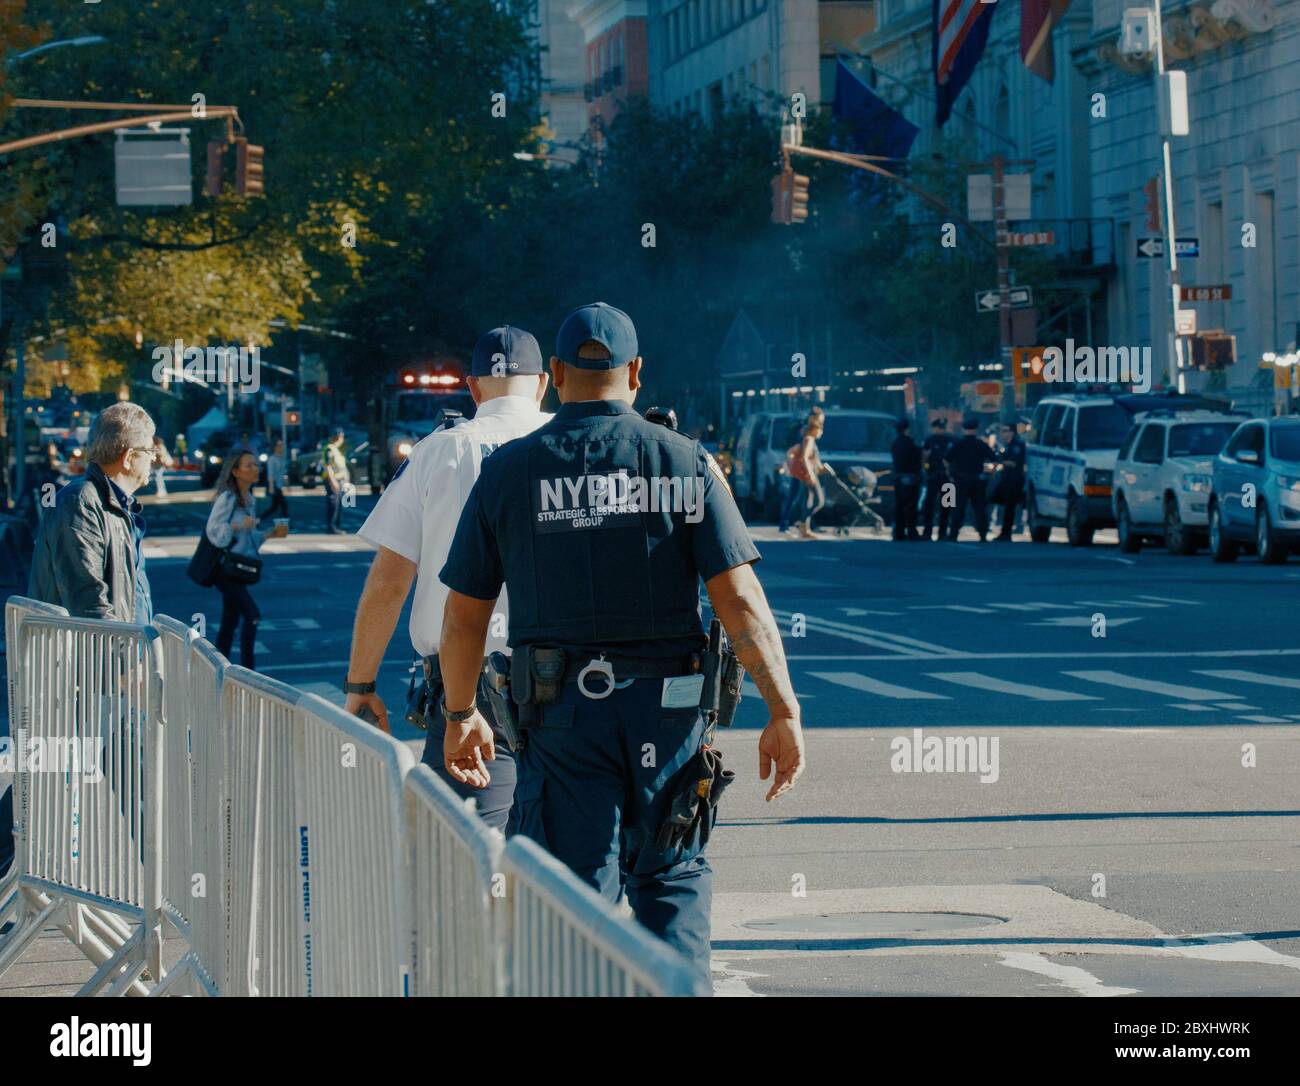 NEW YORK, USA - 01 MAY, 2020: Police officers performing his duties on the streets of Manhattan. New York City Police Department, NYPD Stock Photo